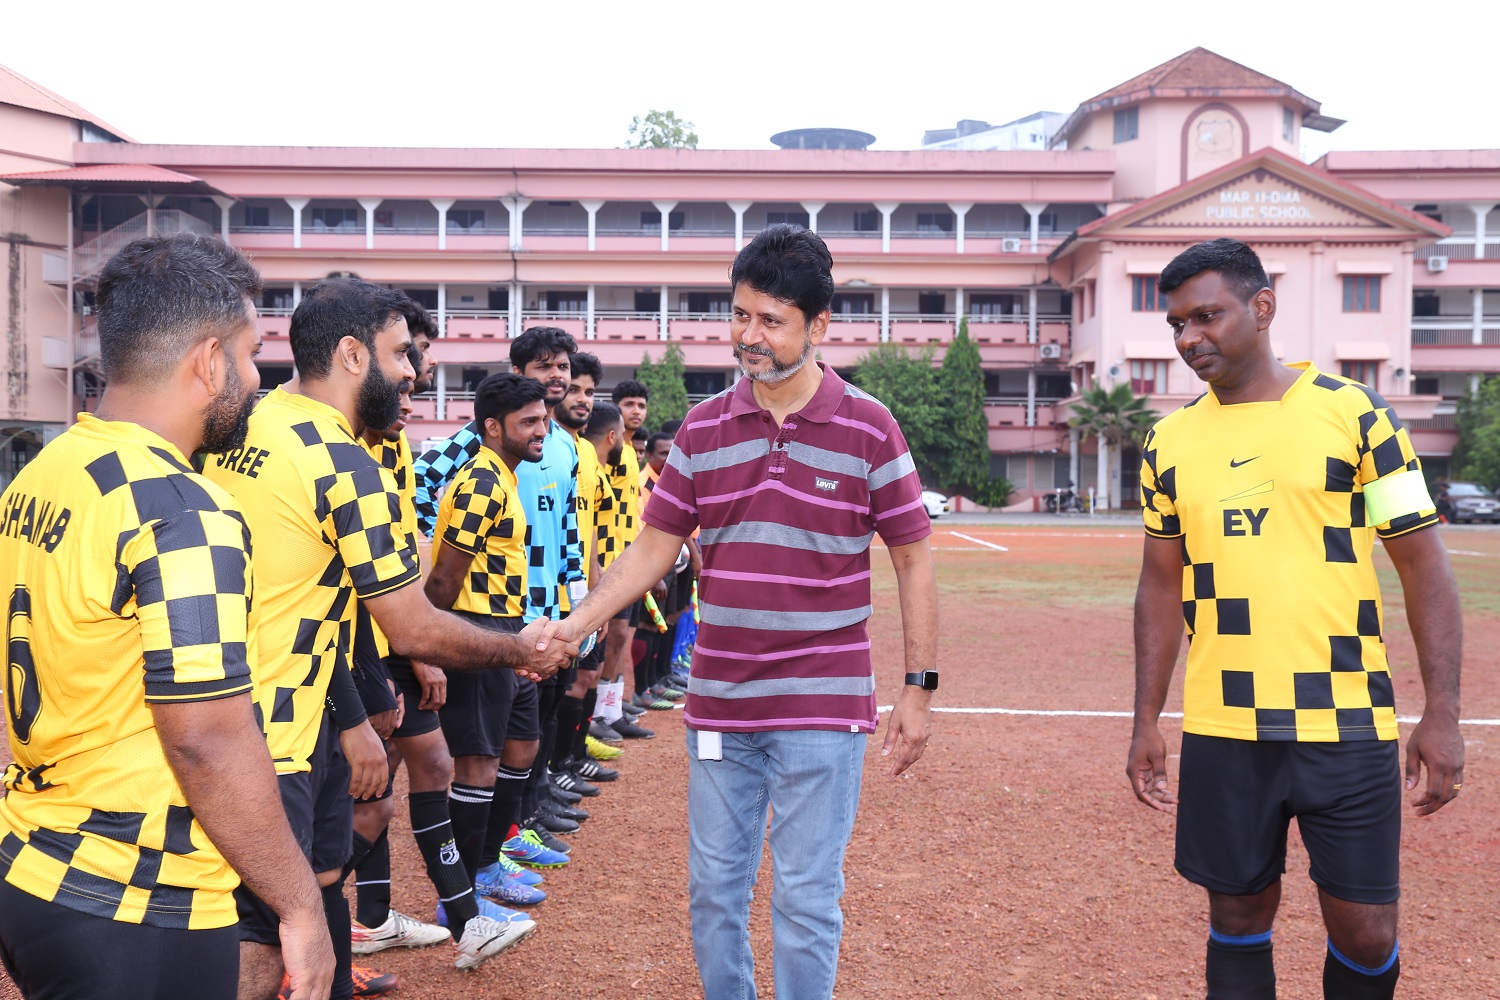 UST Hosts the Seventh Edition of Intercompany Football Tournament ‘Goal’ in Kochi; More than 40 teams to Compete